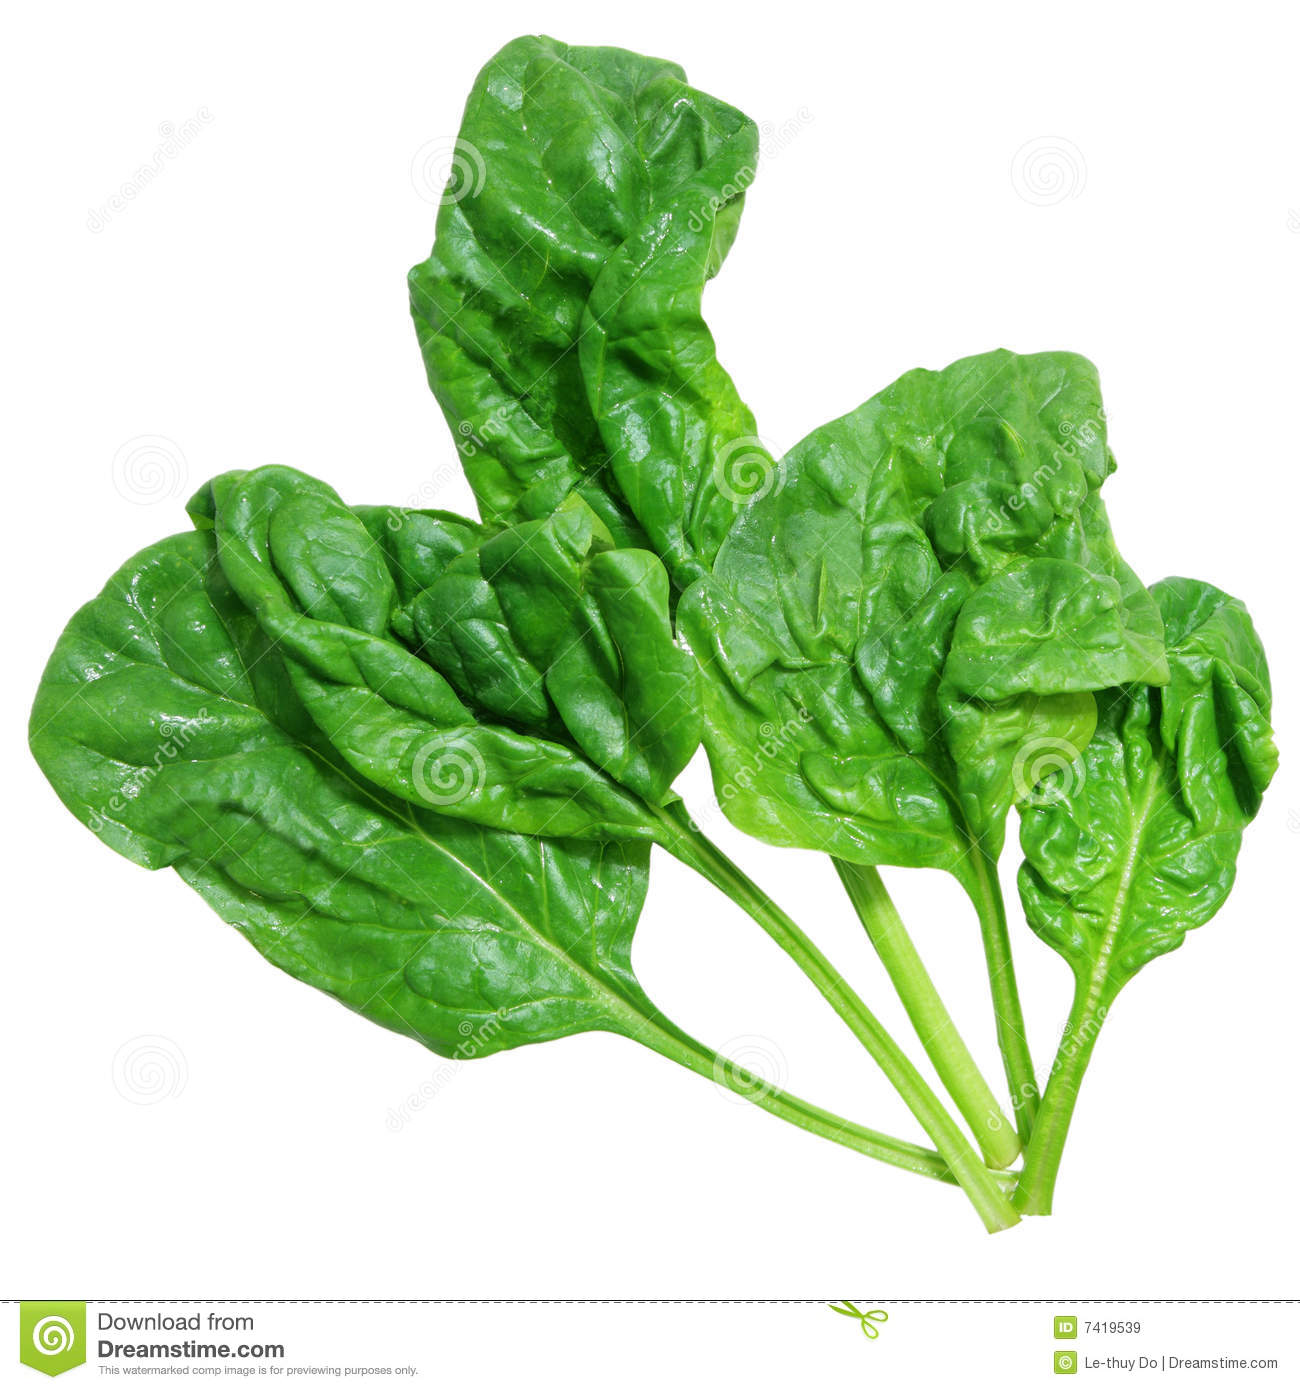 Curly Spinach Royalty Free Stock Images   Image  7419539